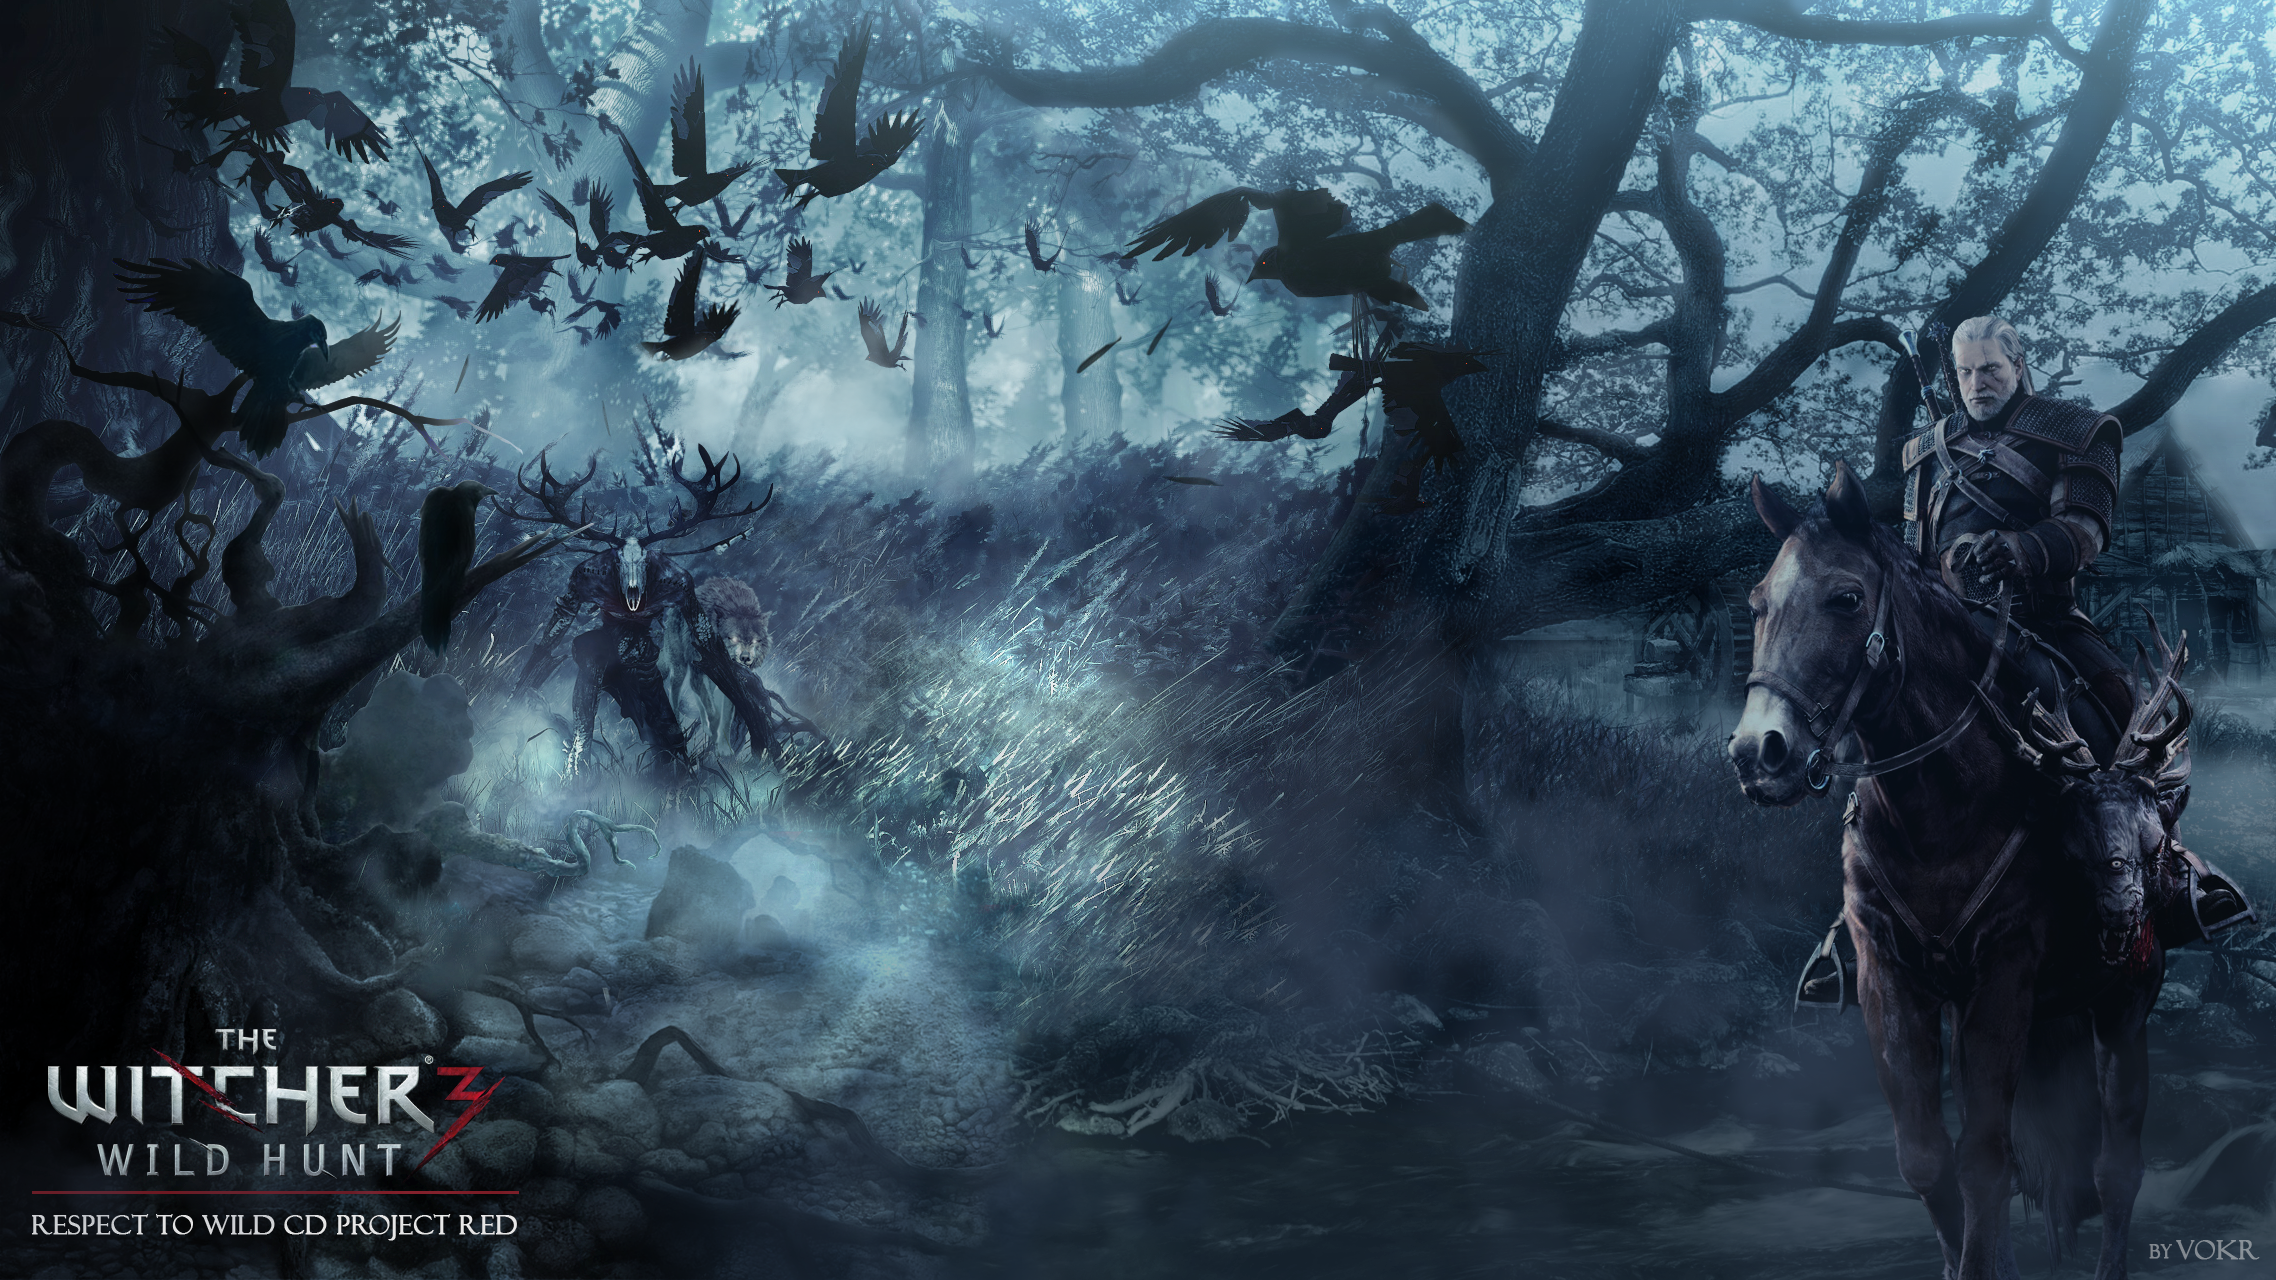 The Witcher Wild Hunt Wallpaper by Vokr